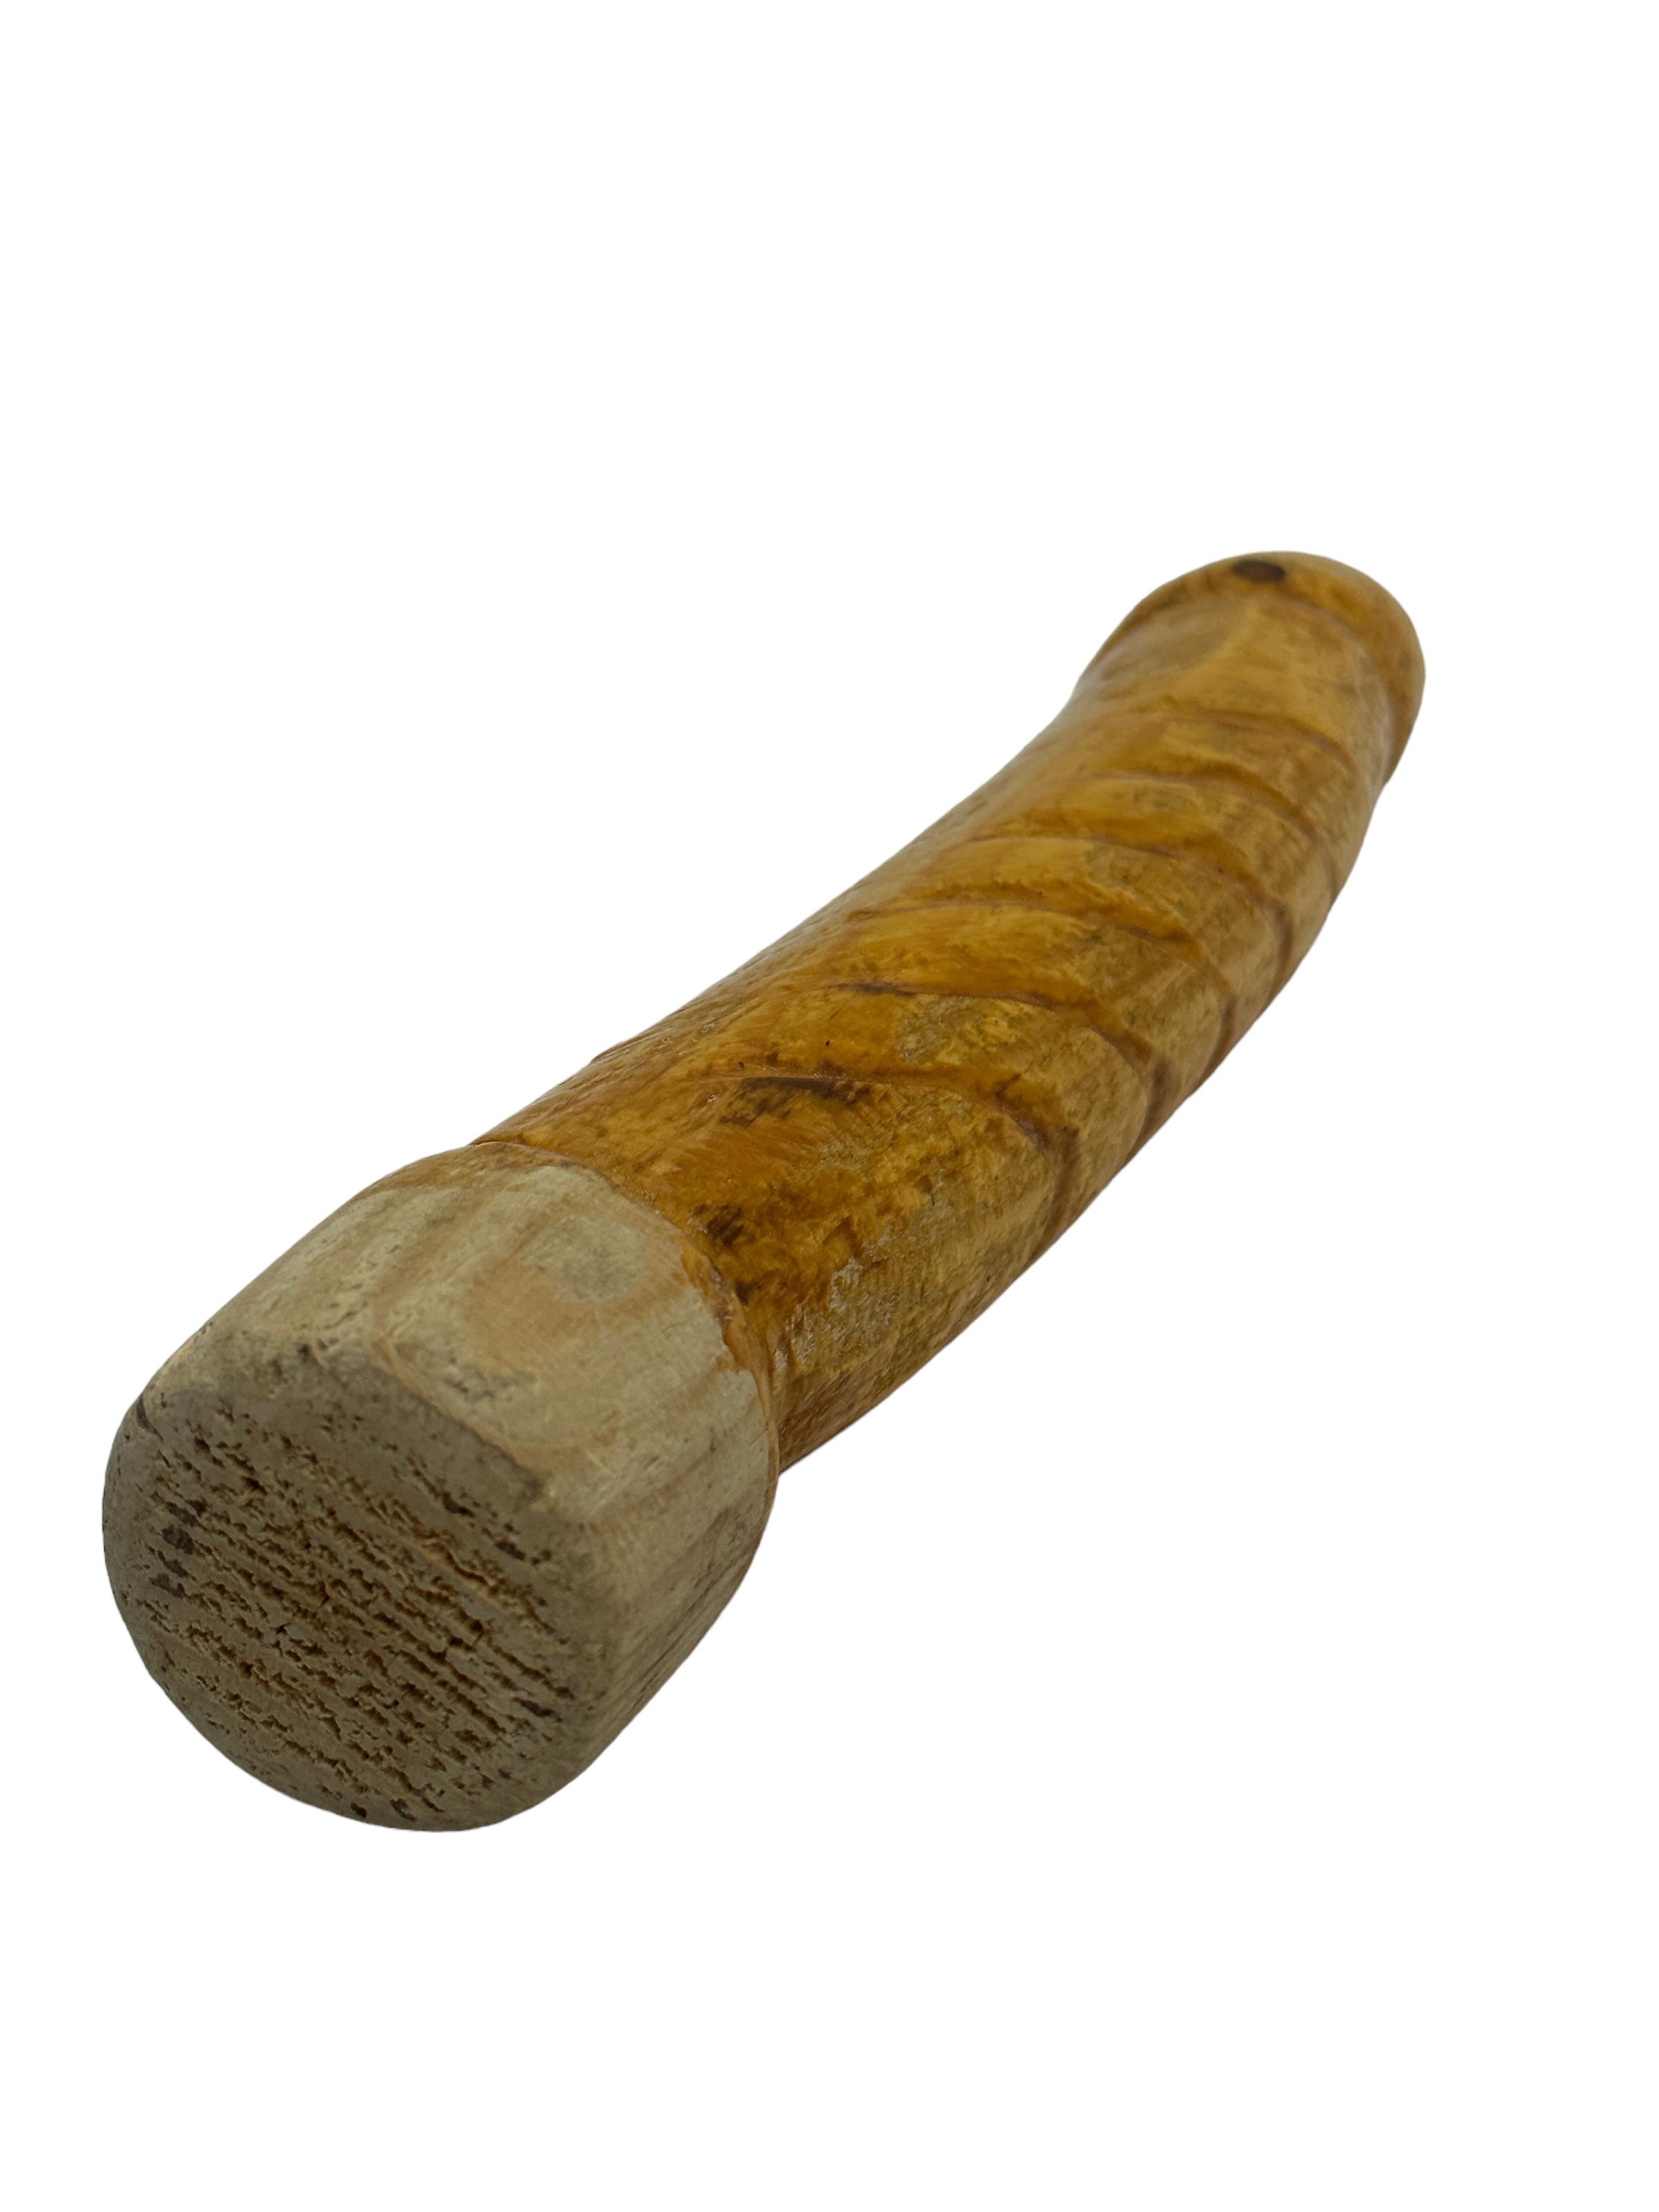 Wood Carving Penis Figurine Wabi Sabi Object Vintage Asia 1950s In Good Condition For Sale In Nuernberg, DE